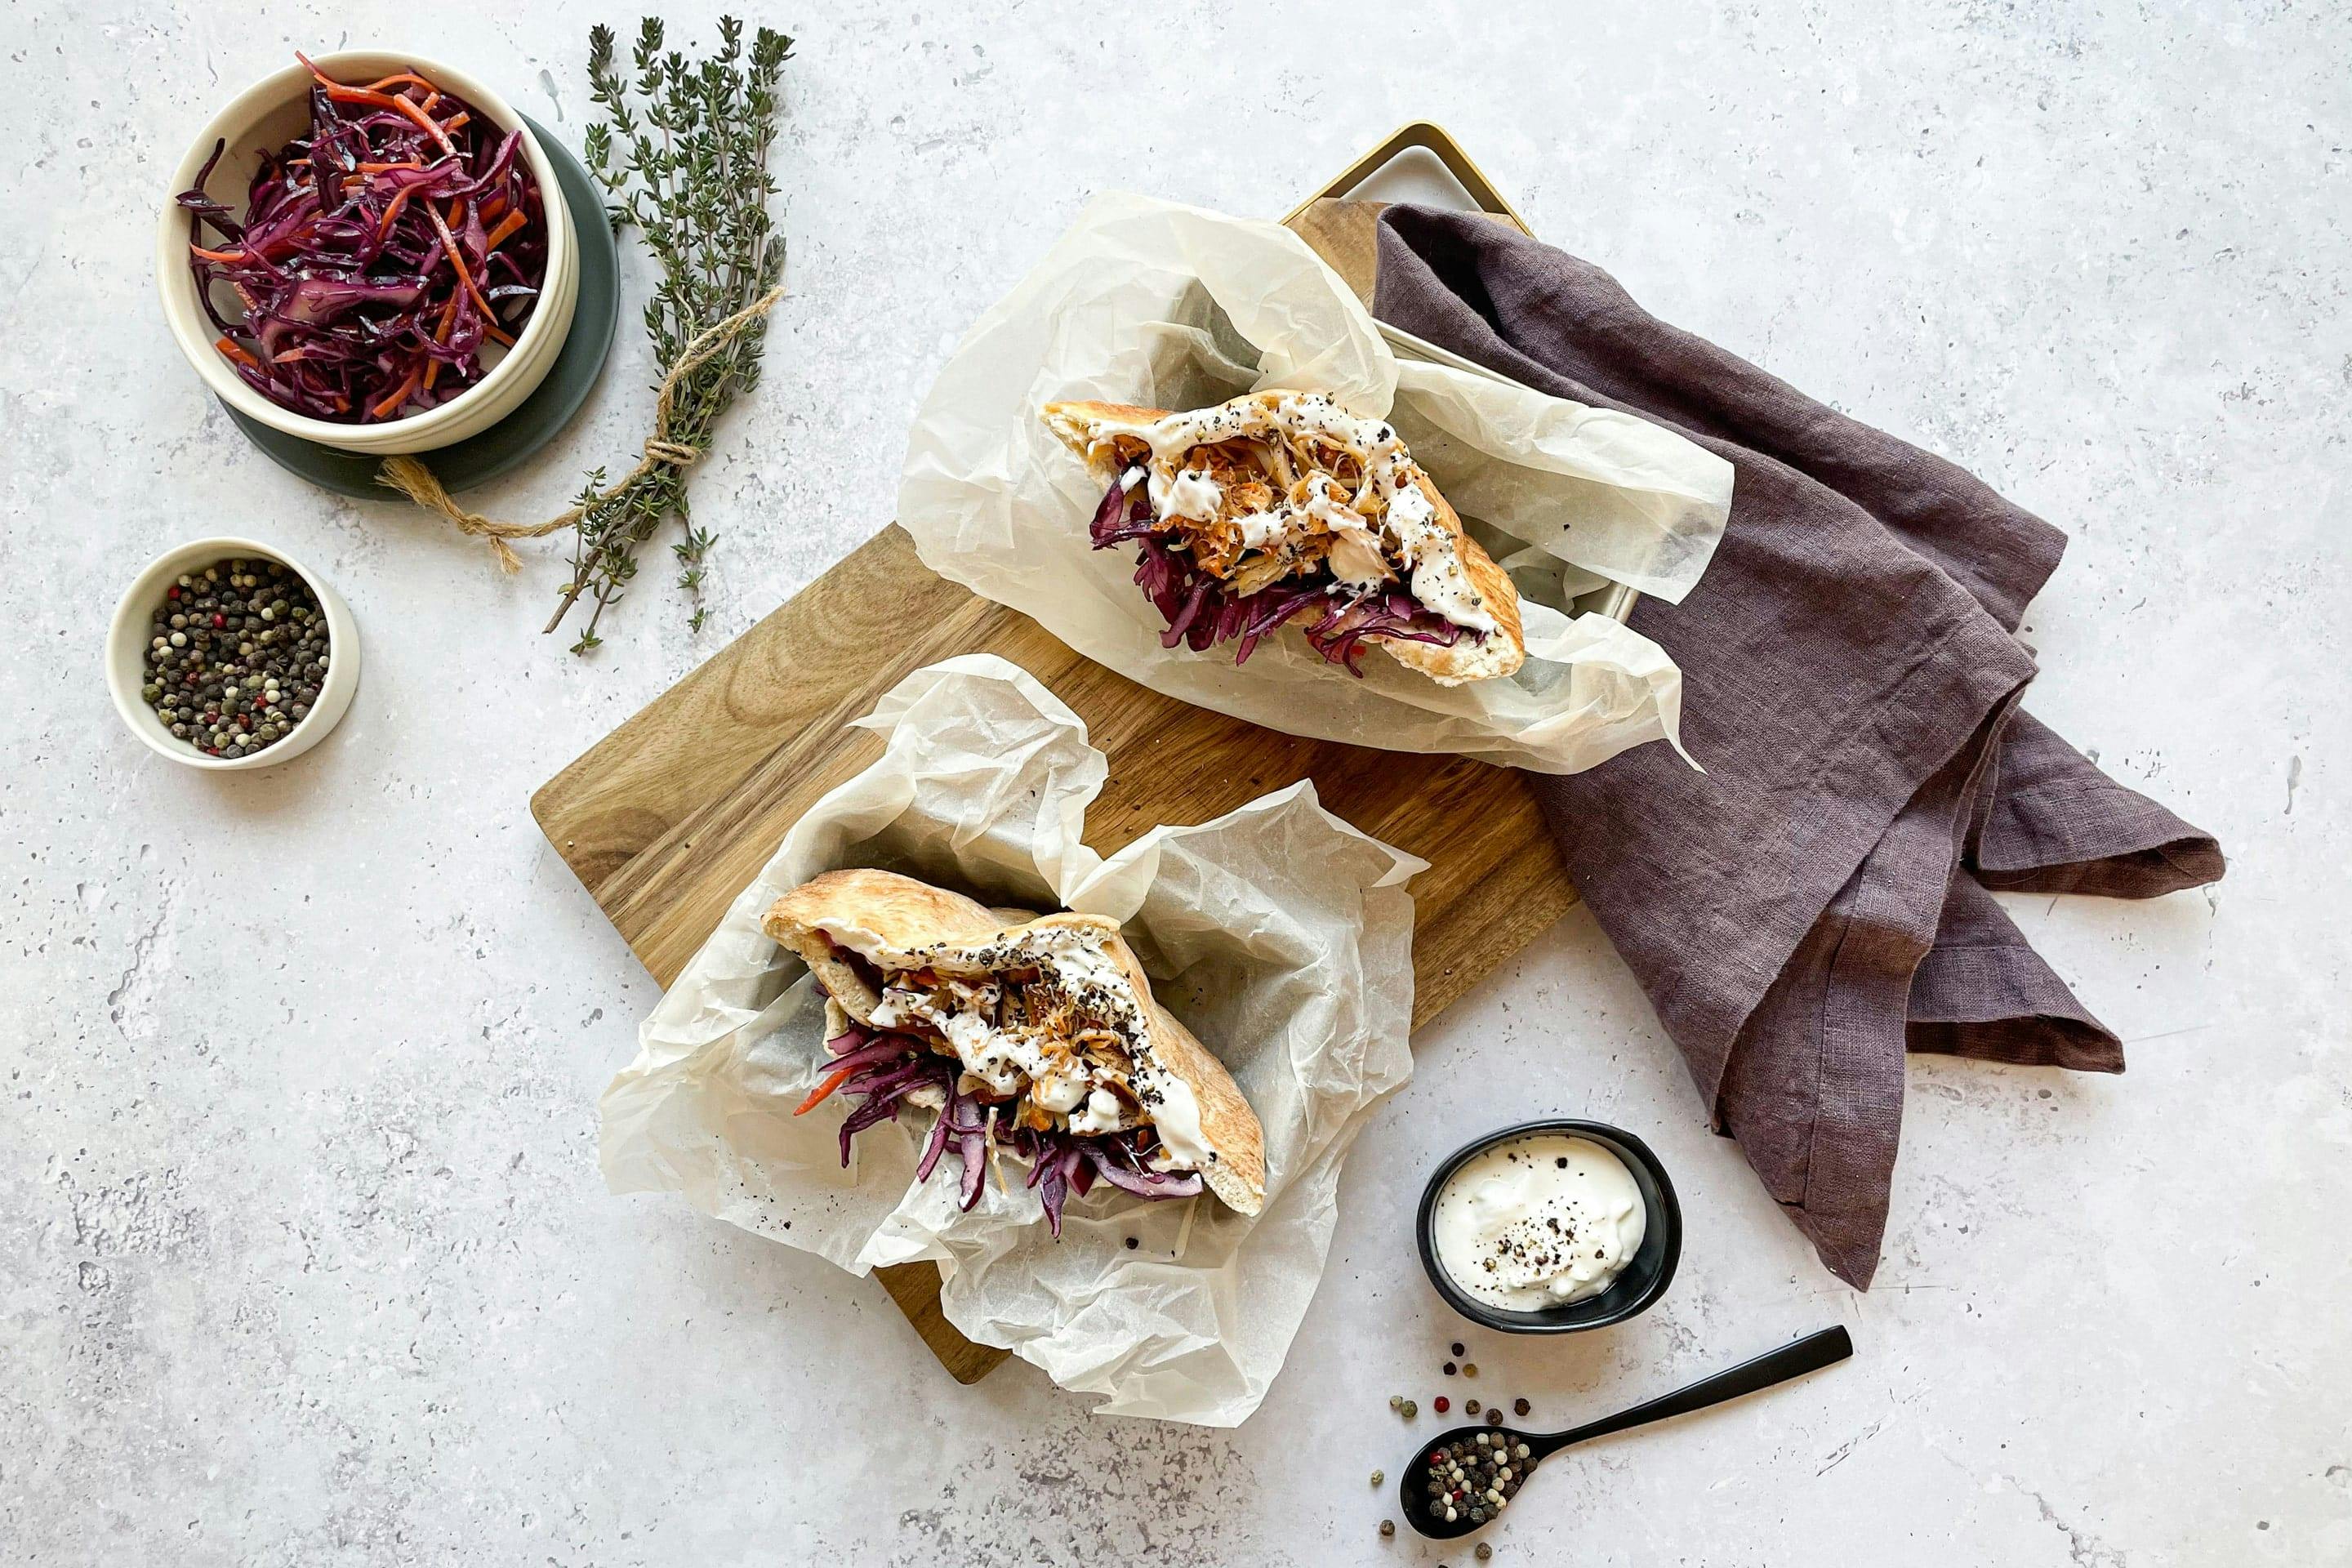 Aromatic pulled chicken sandwiches with coleslaw.